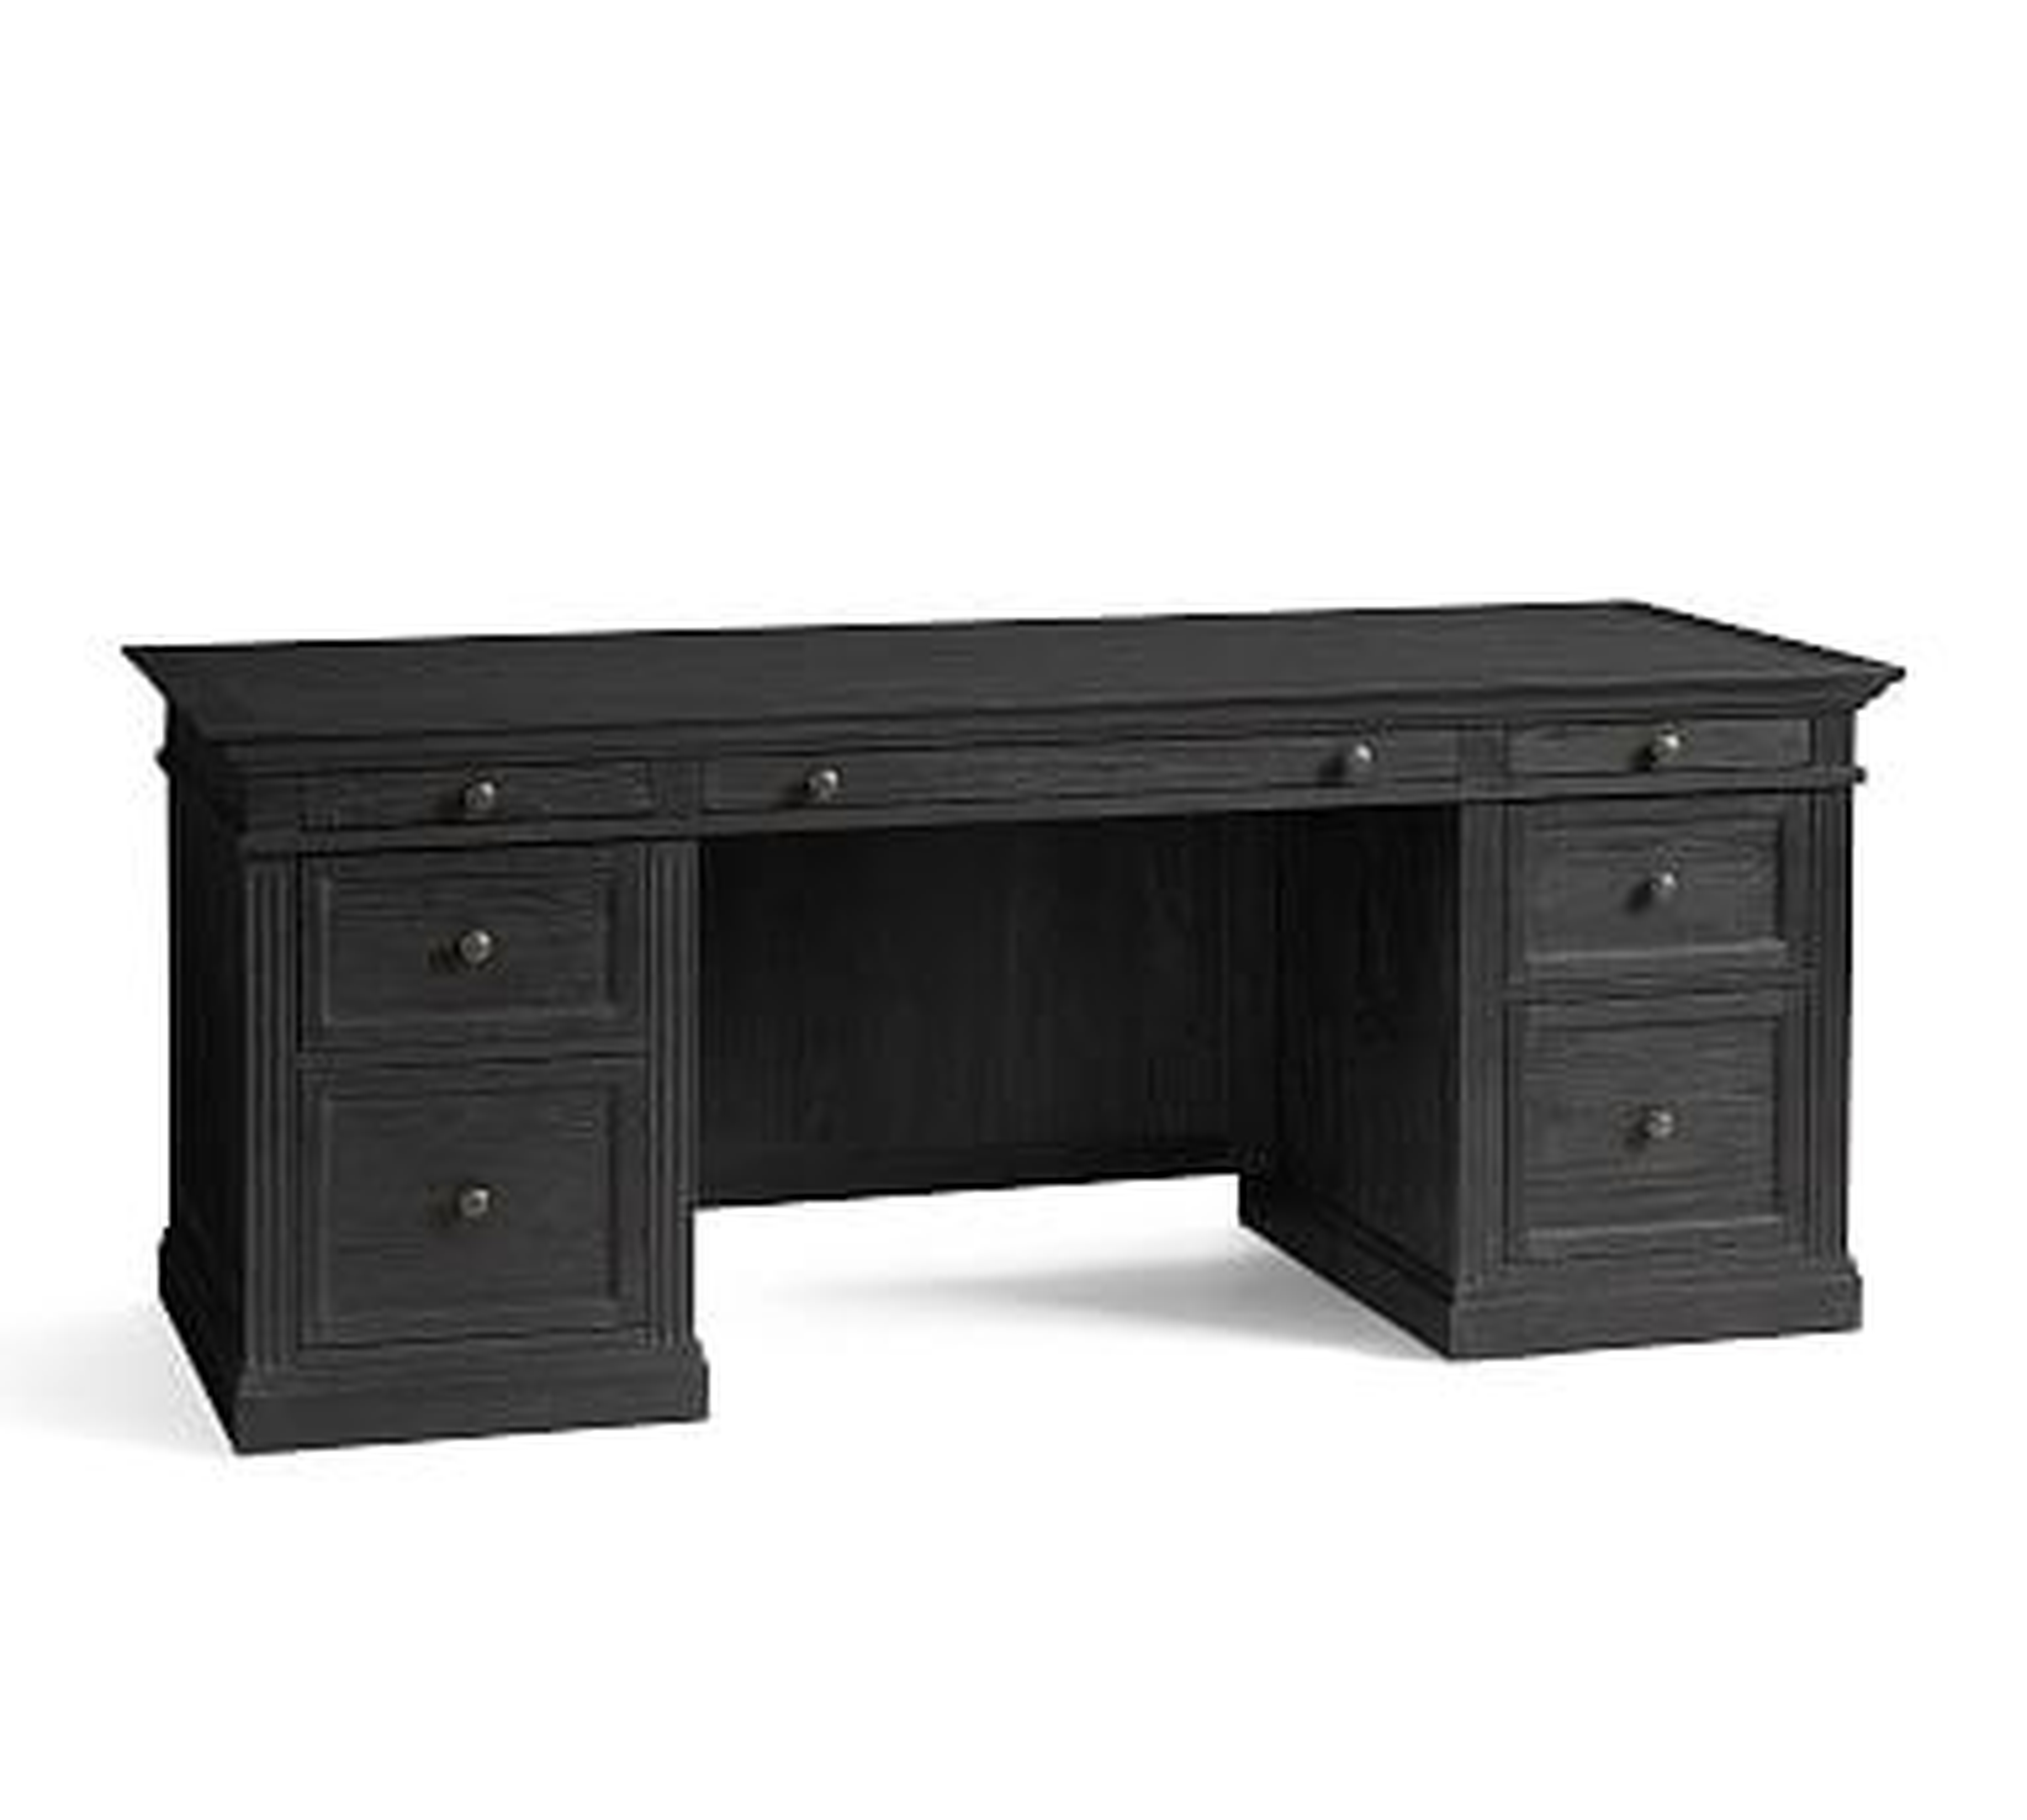 Livingston 75" Executive Desk with Drawers, Dusty Charcoal - Pottery Barn